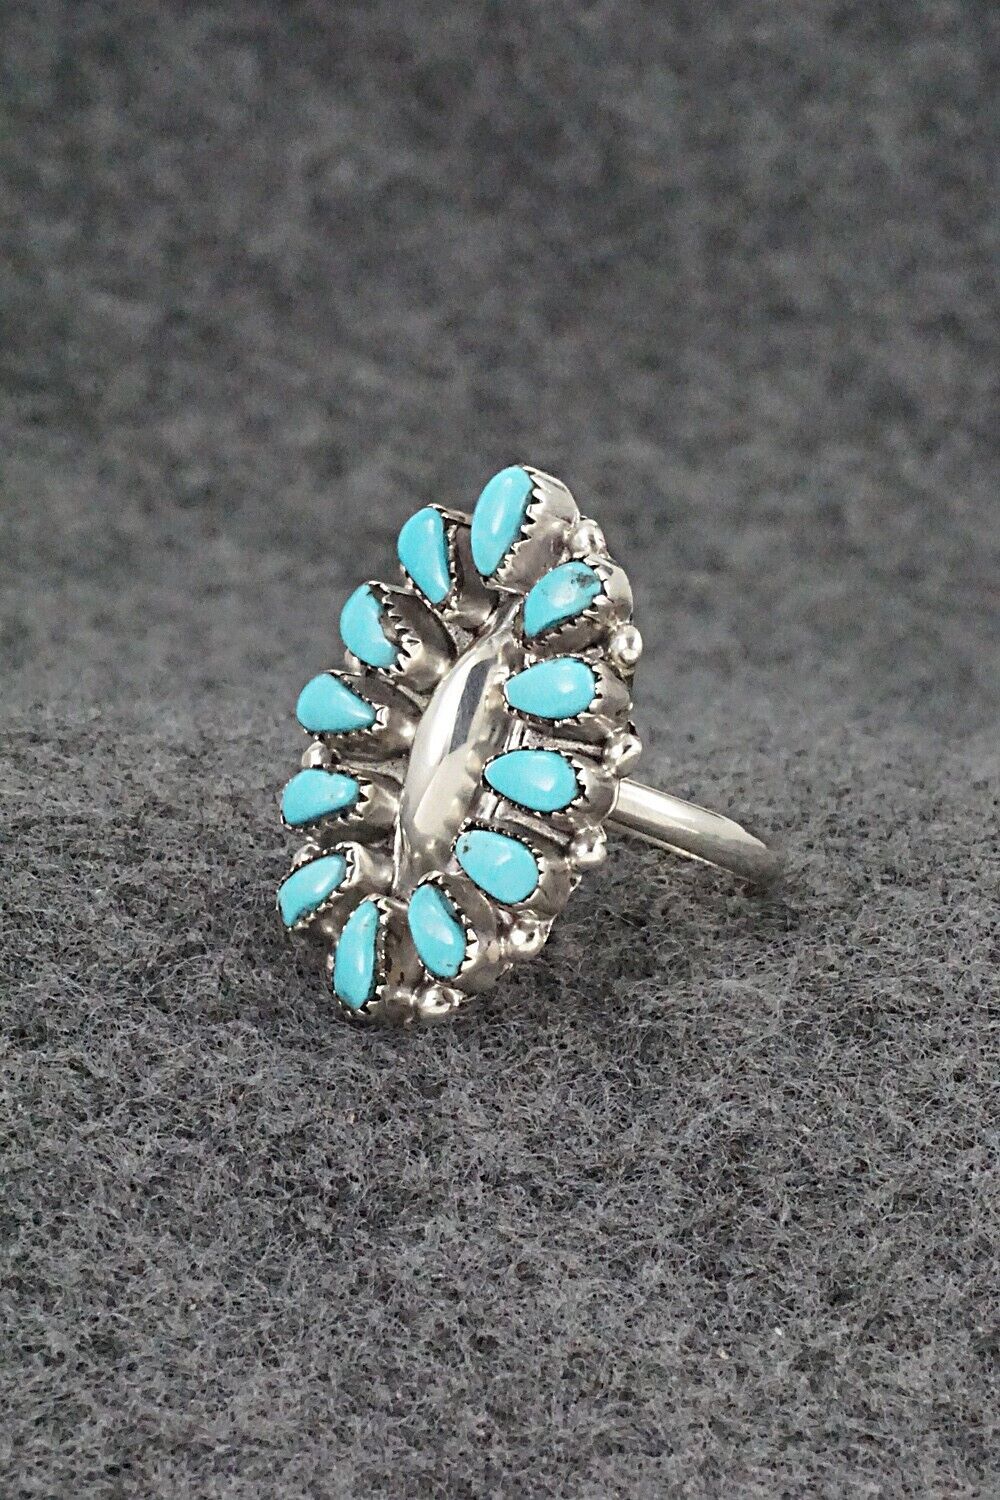 Turquoise & Sterling Silver Ring - Mary Chavez - Size 7.25